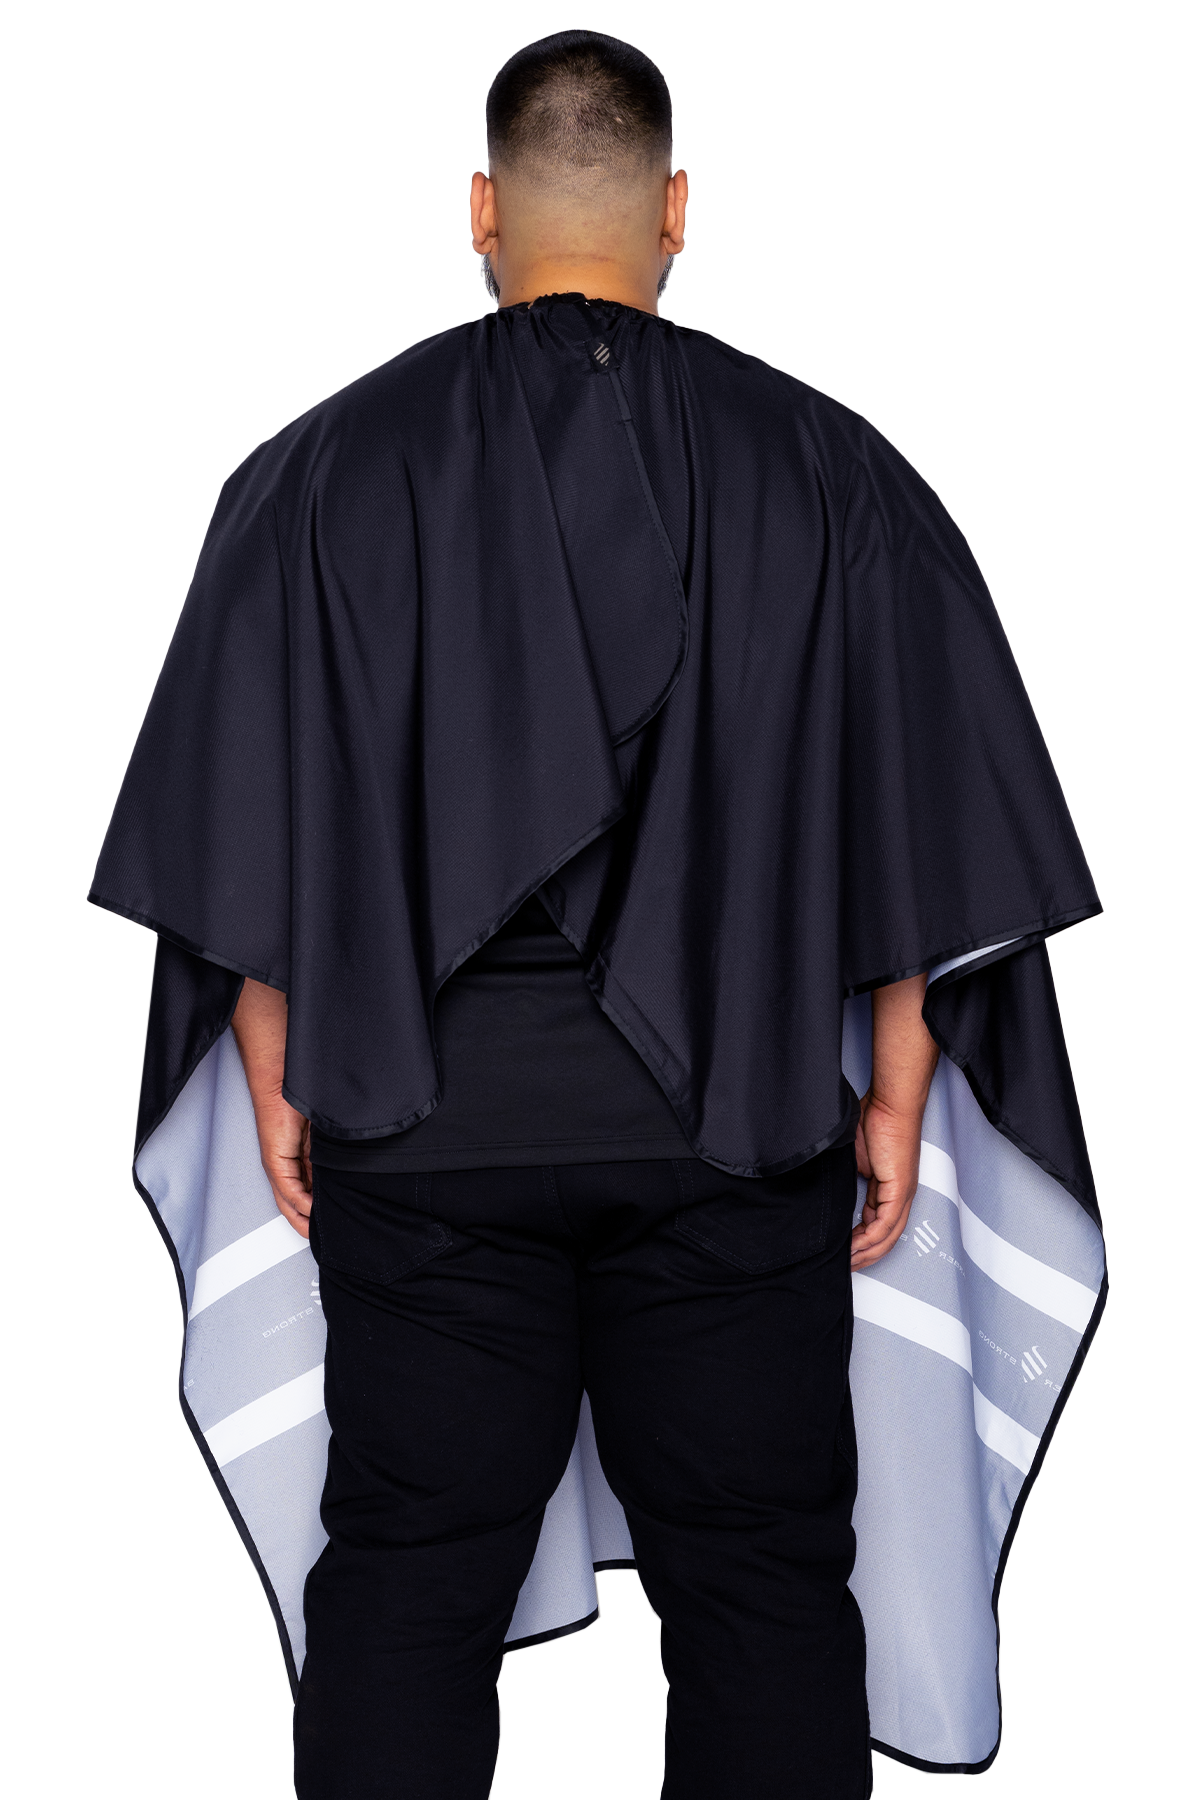 6-PACK Extra Large Barber Capes (Crepe) - Get Yours Now!, , USA